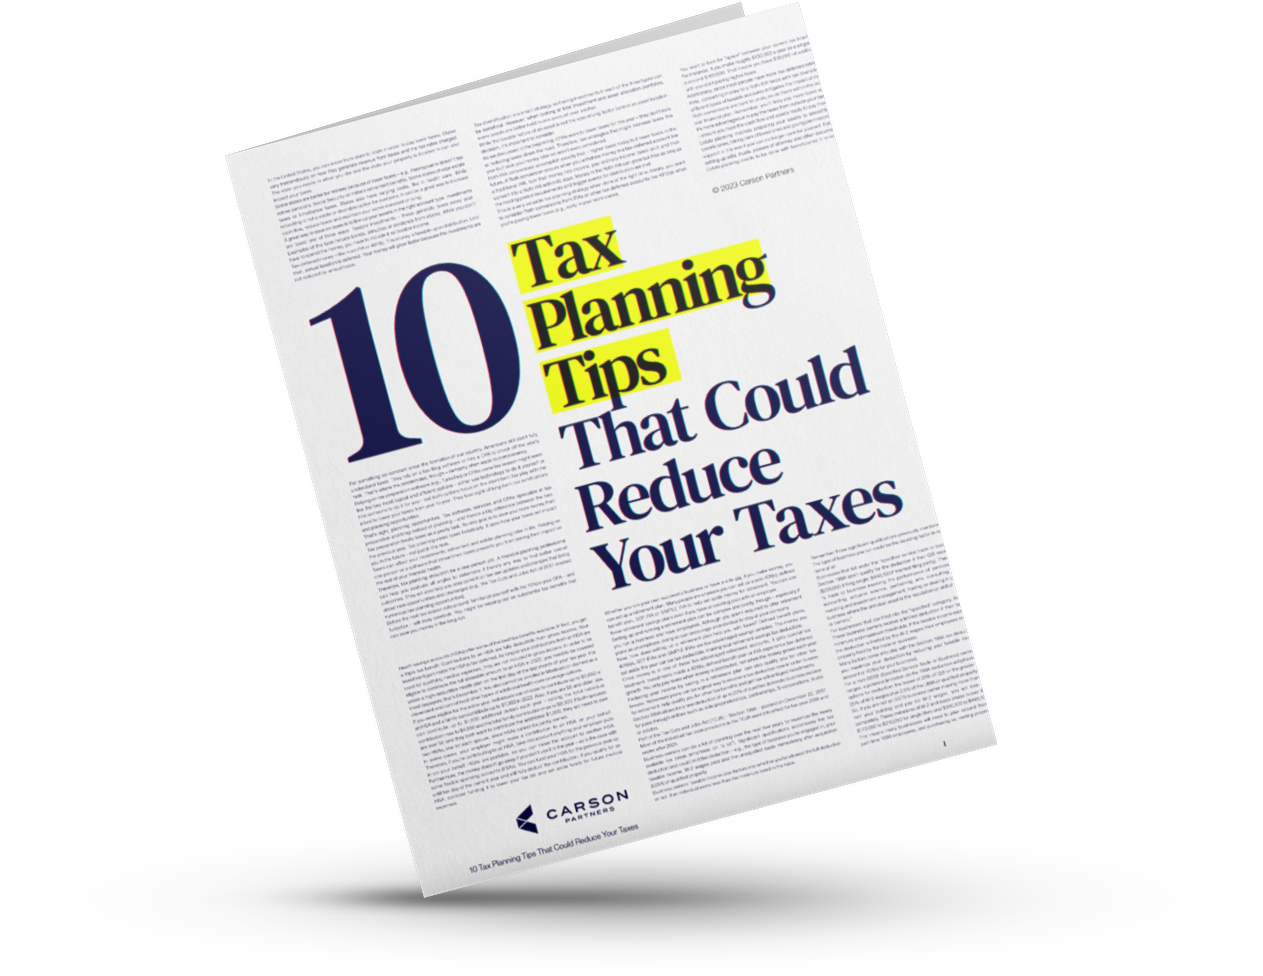 10 Tax Planning Tips That Could Reduce Your Taxes